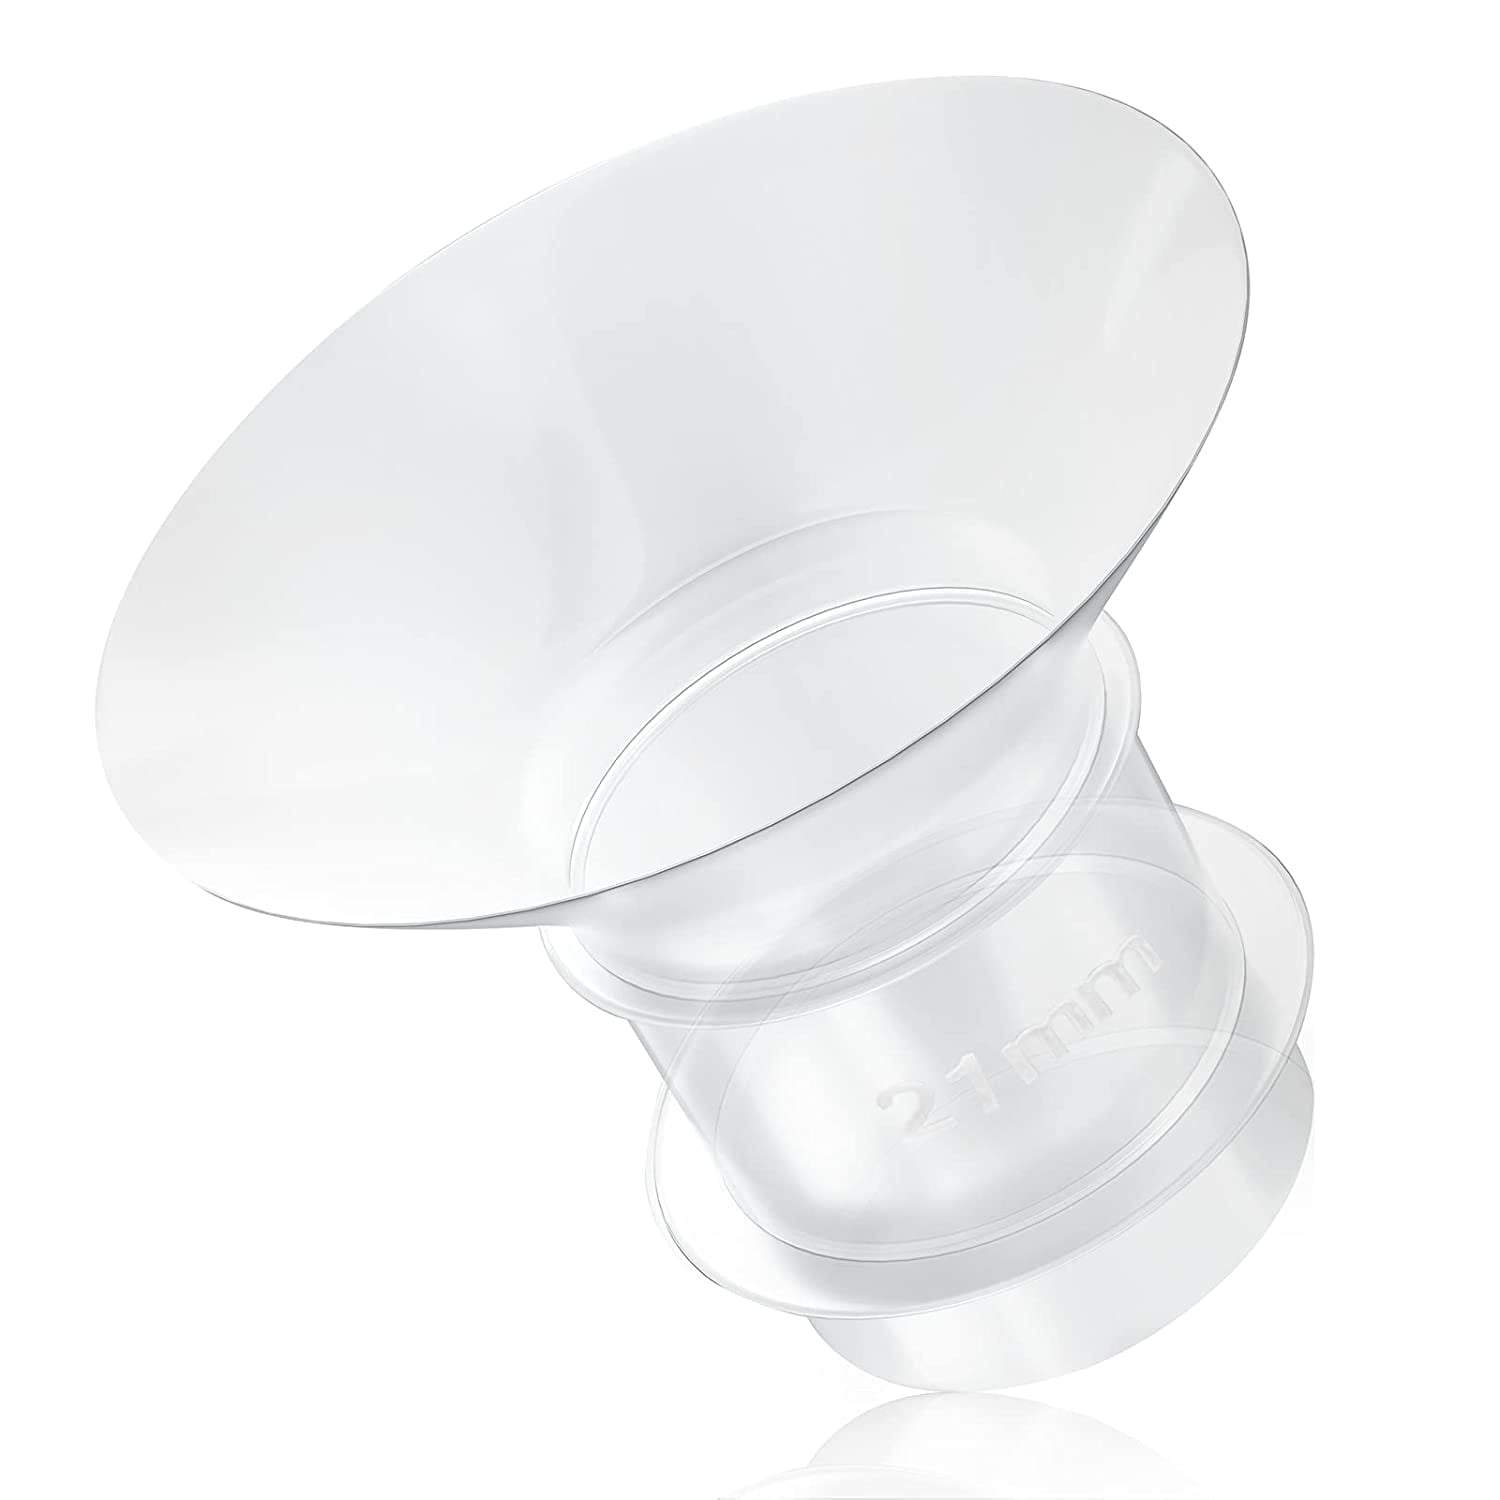 Flange Insert for S9 / S12: Breast Pump Replacement Parts